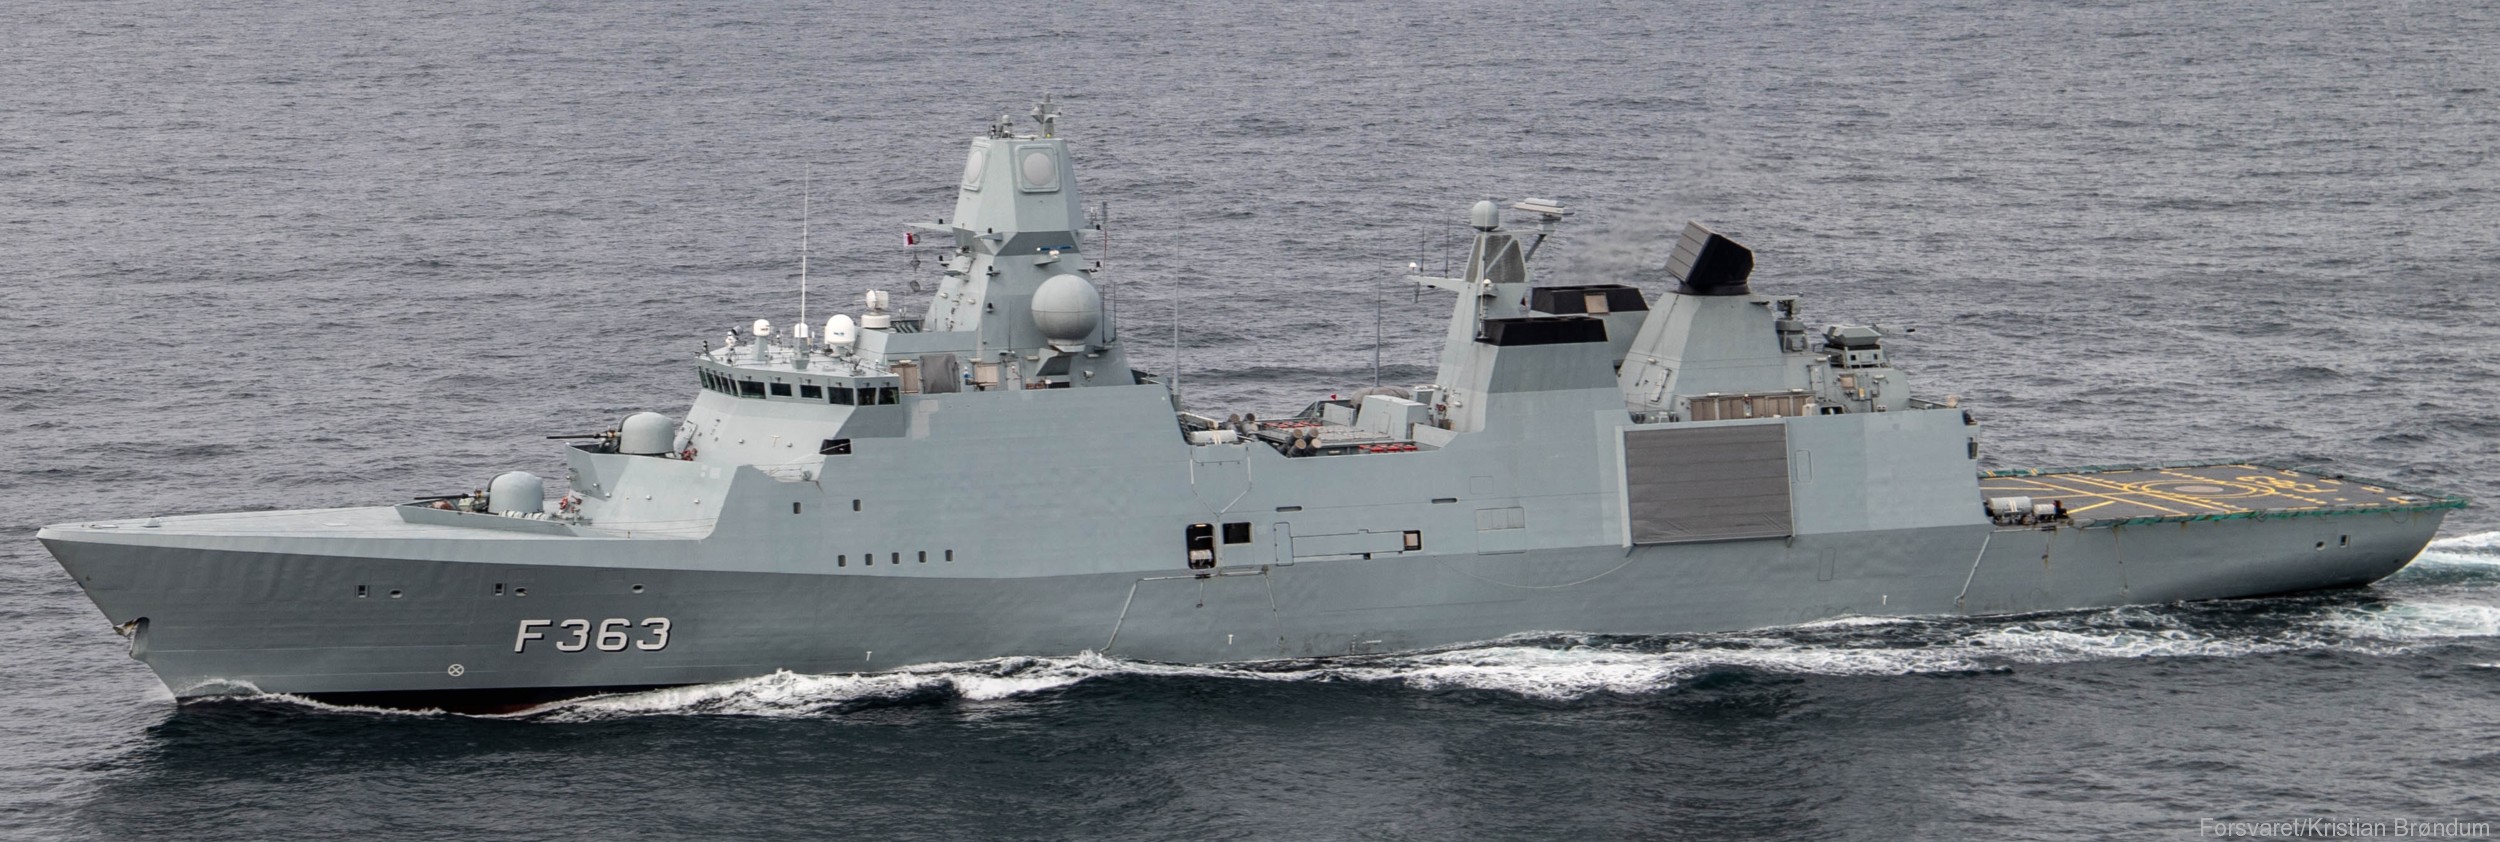 f-363 hdms niels juel iver huitfeldt class guided missile frigate ffg royal danish navy 29